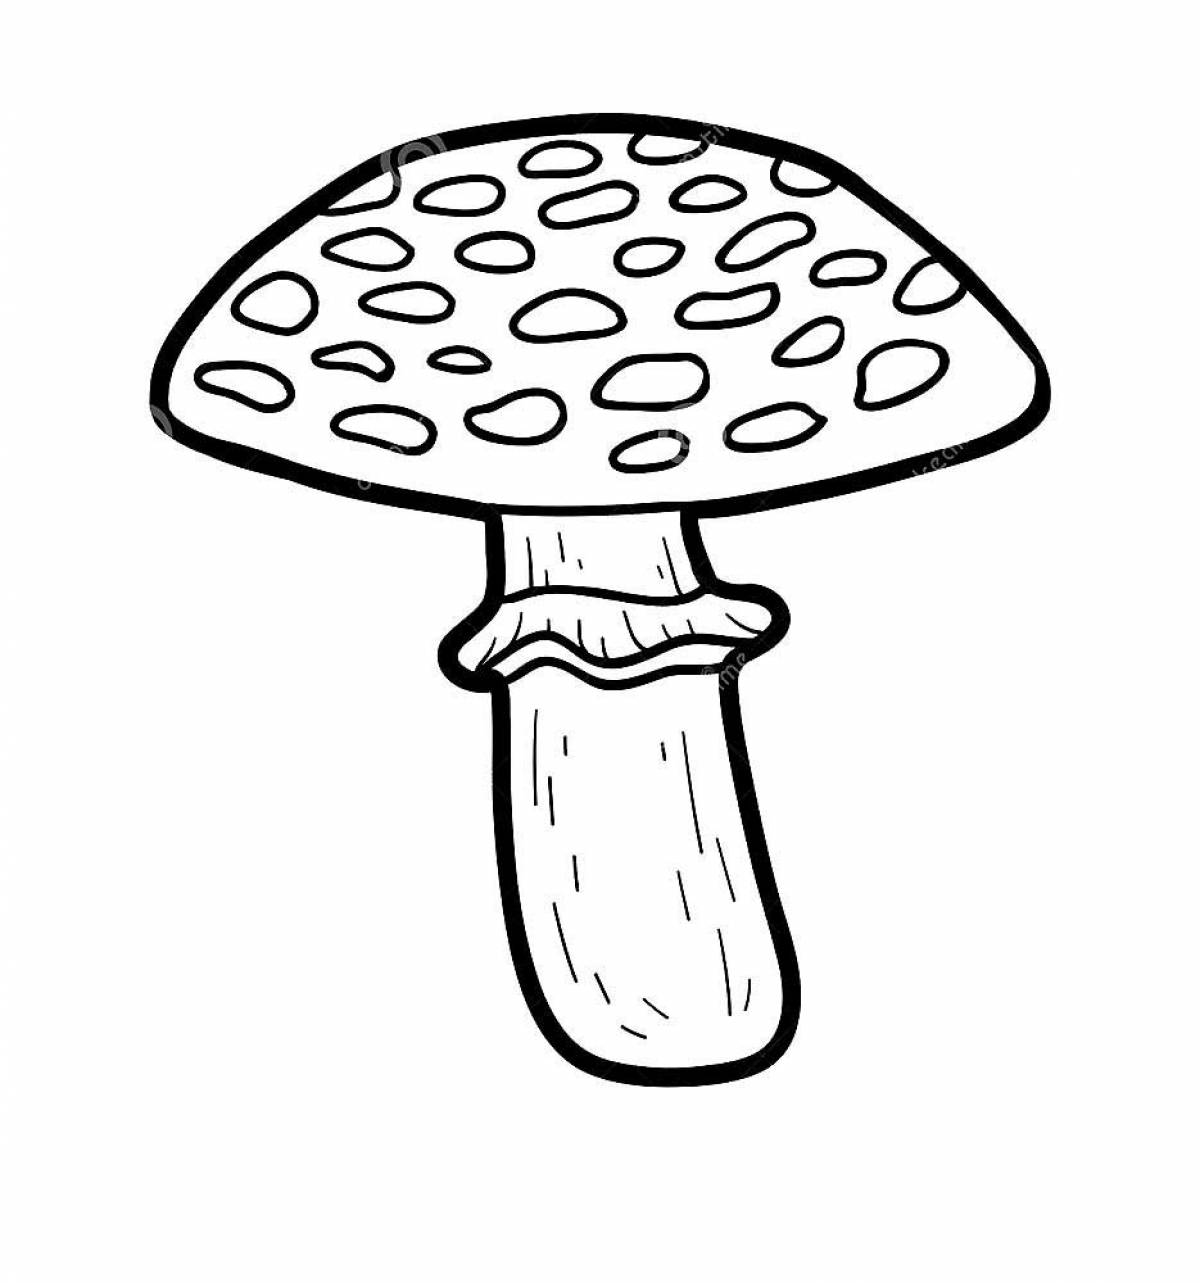 A fly agaric pattern